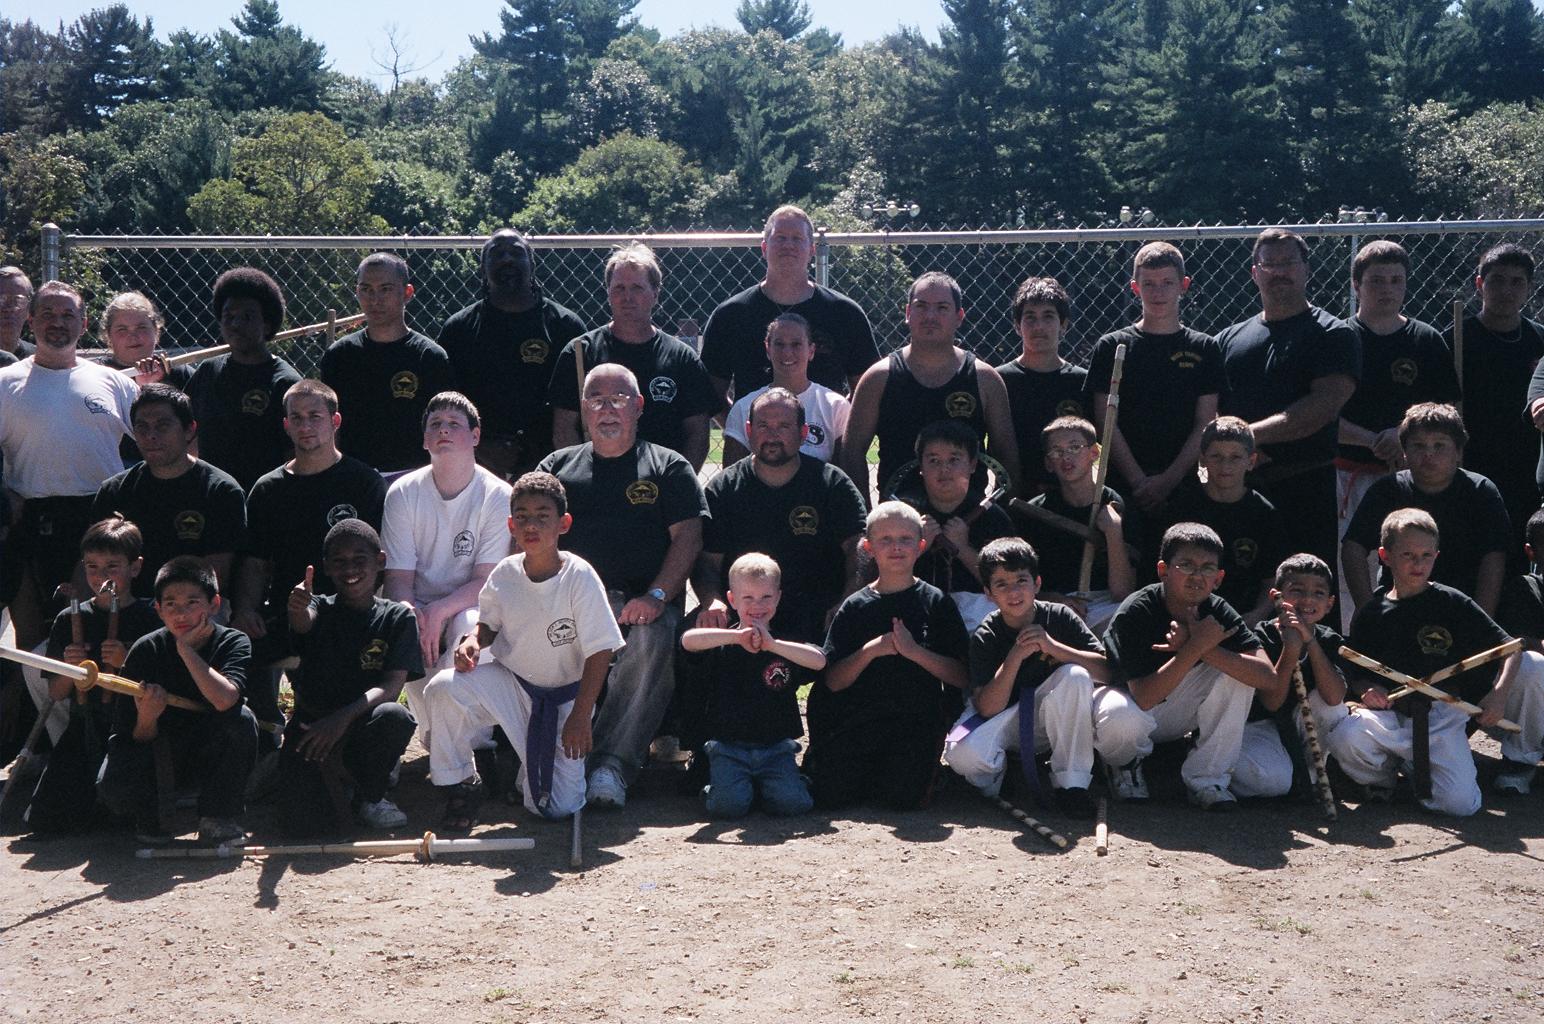 SHIHAN NESTA'S WEAPONS IN THE PARK 2004